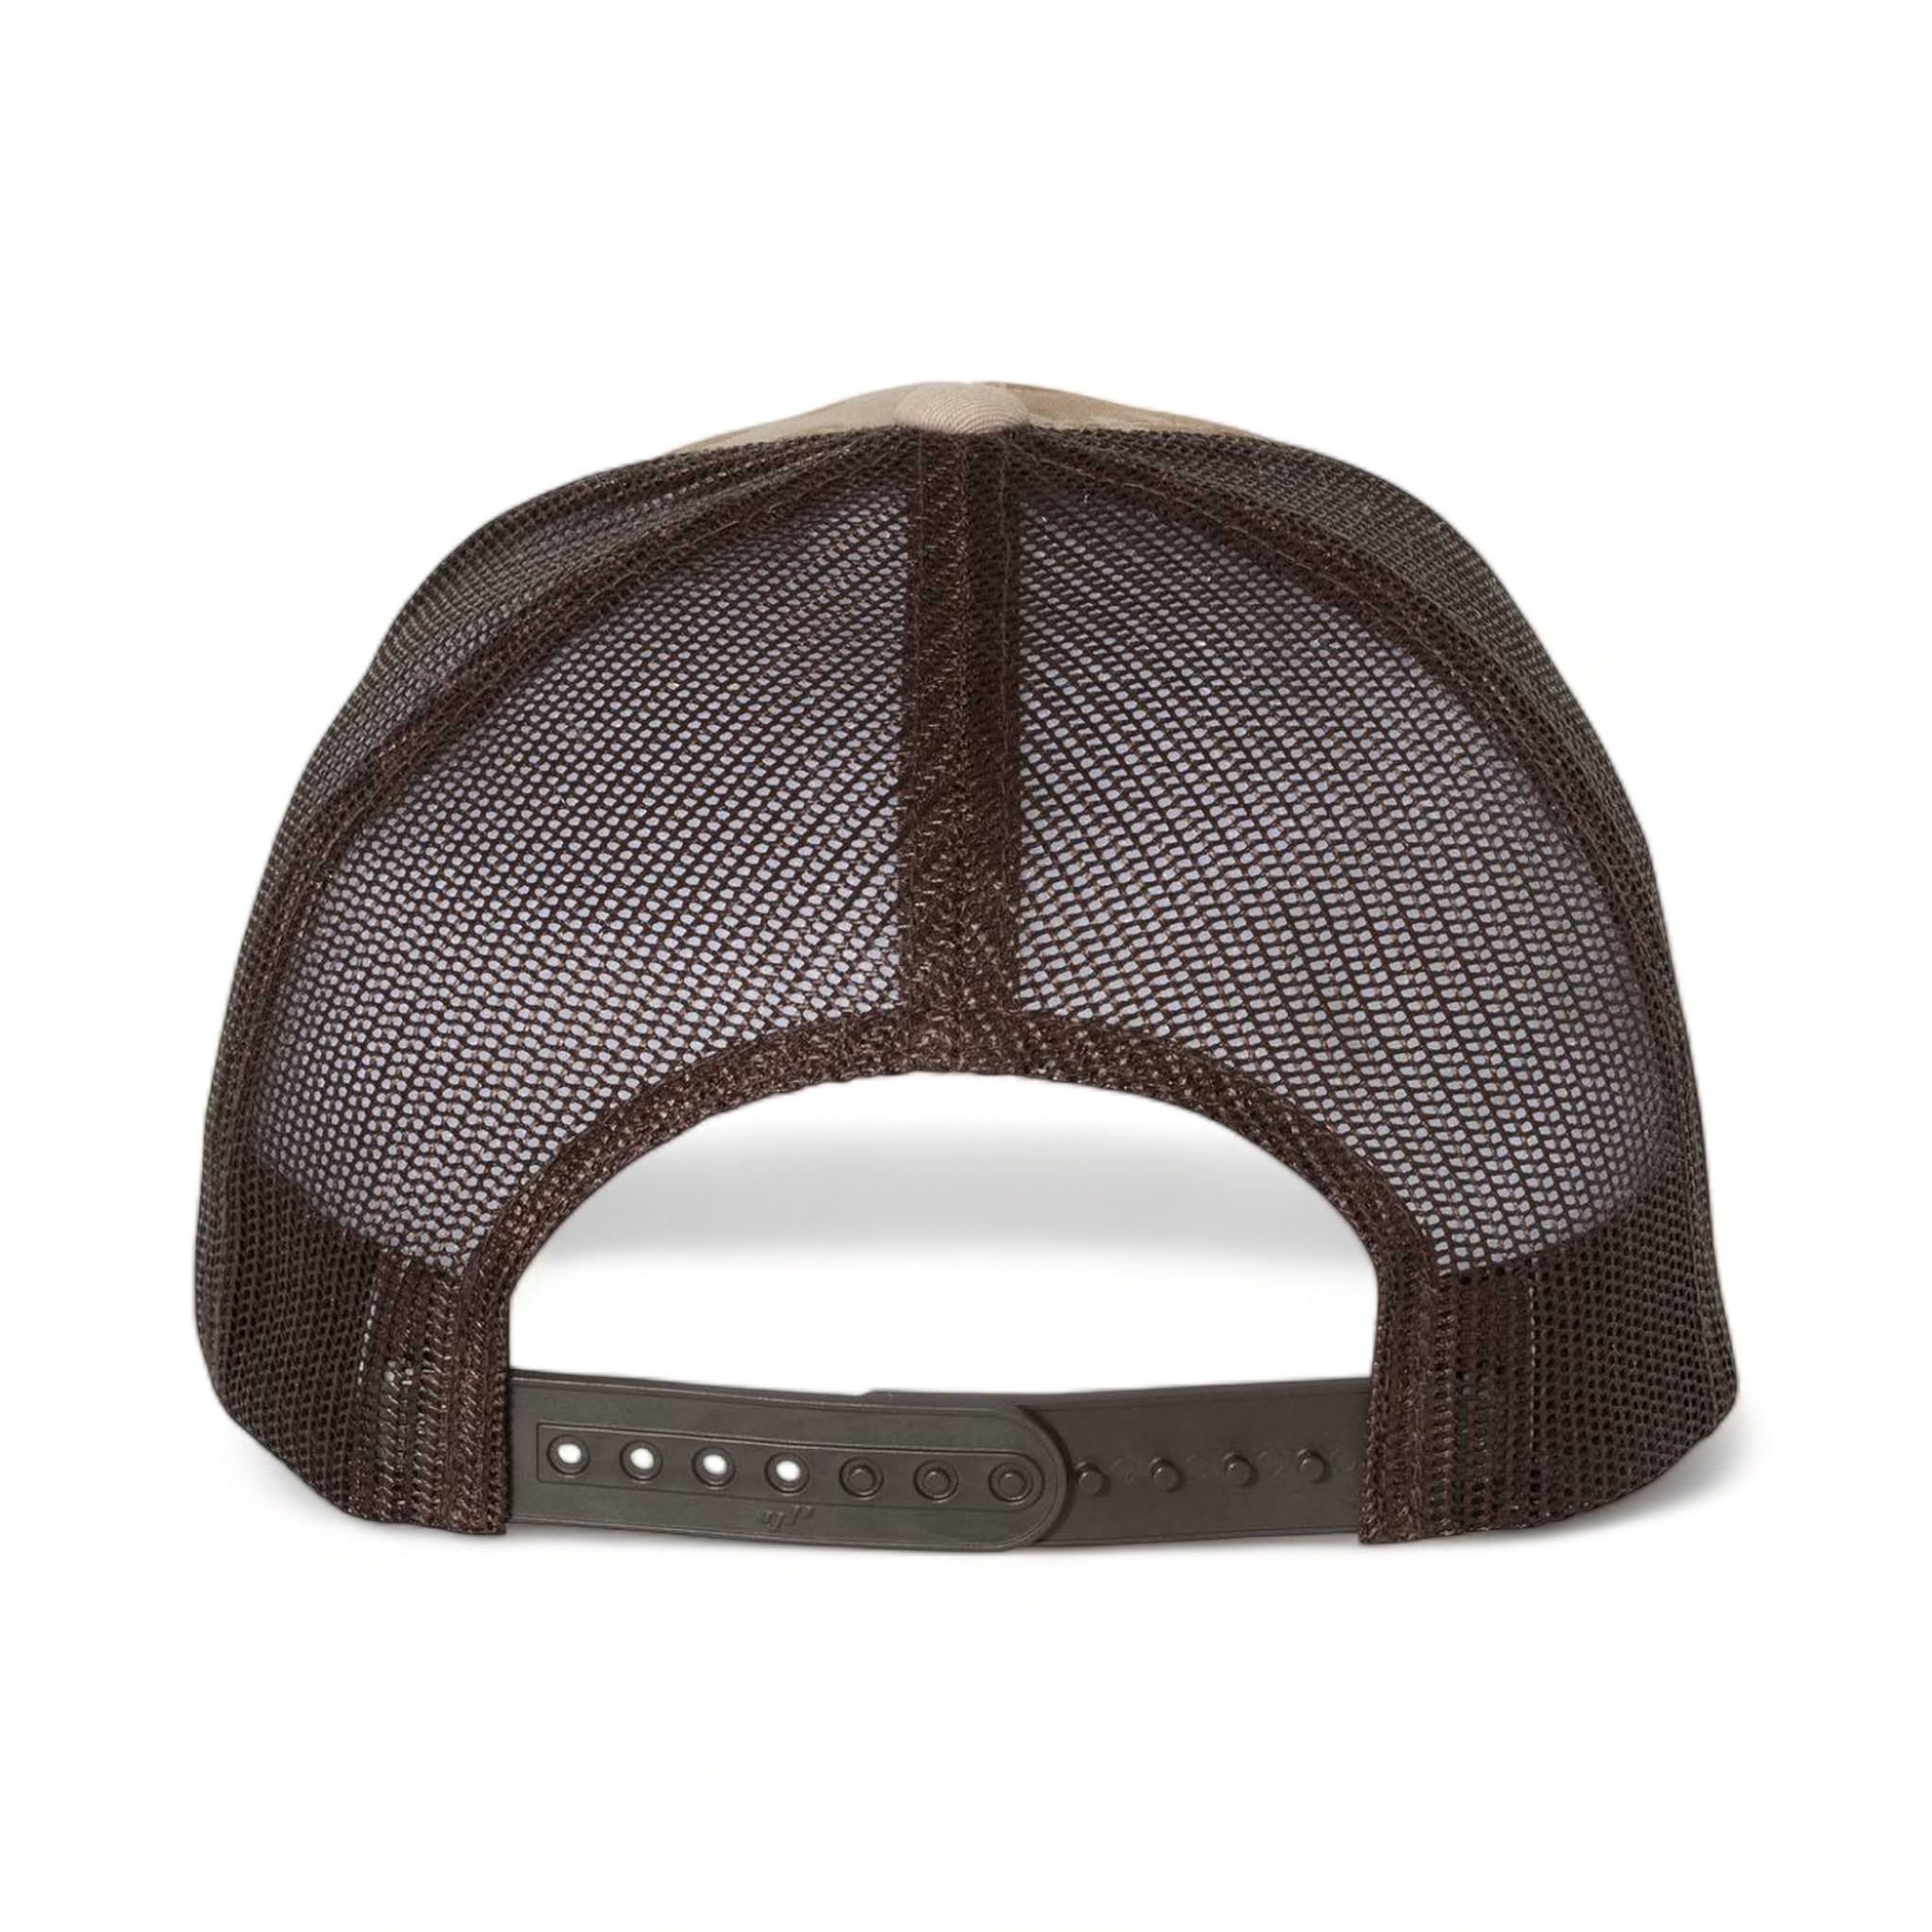 Back view of YP Classics 6606 custom hat in multicam arid and brown